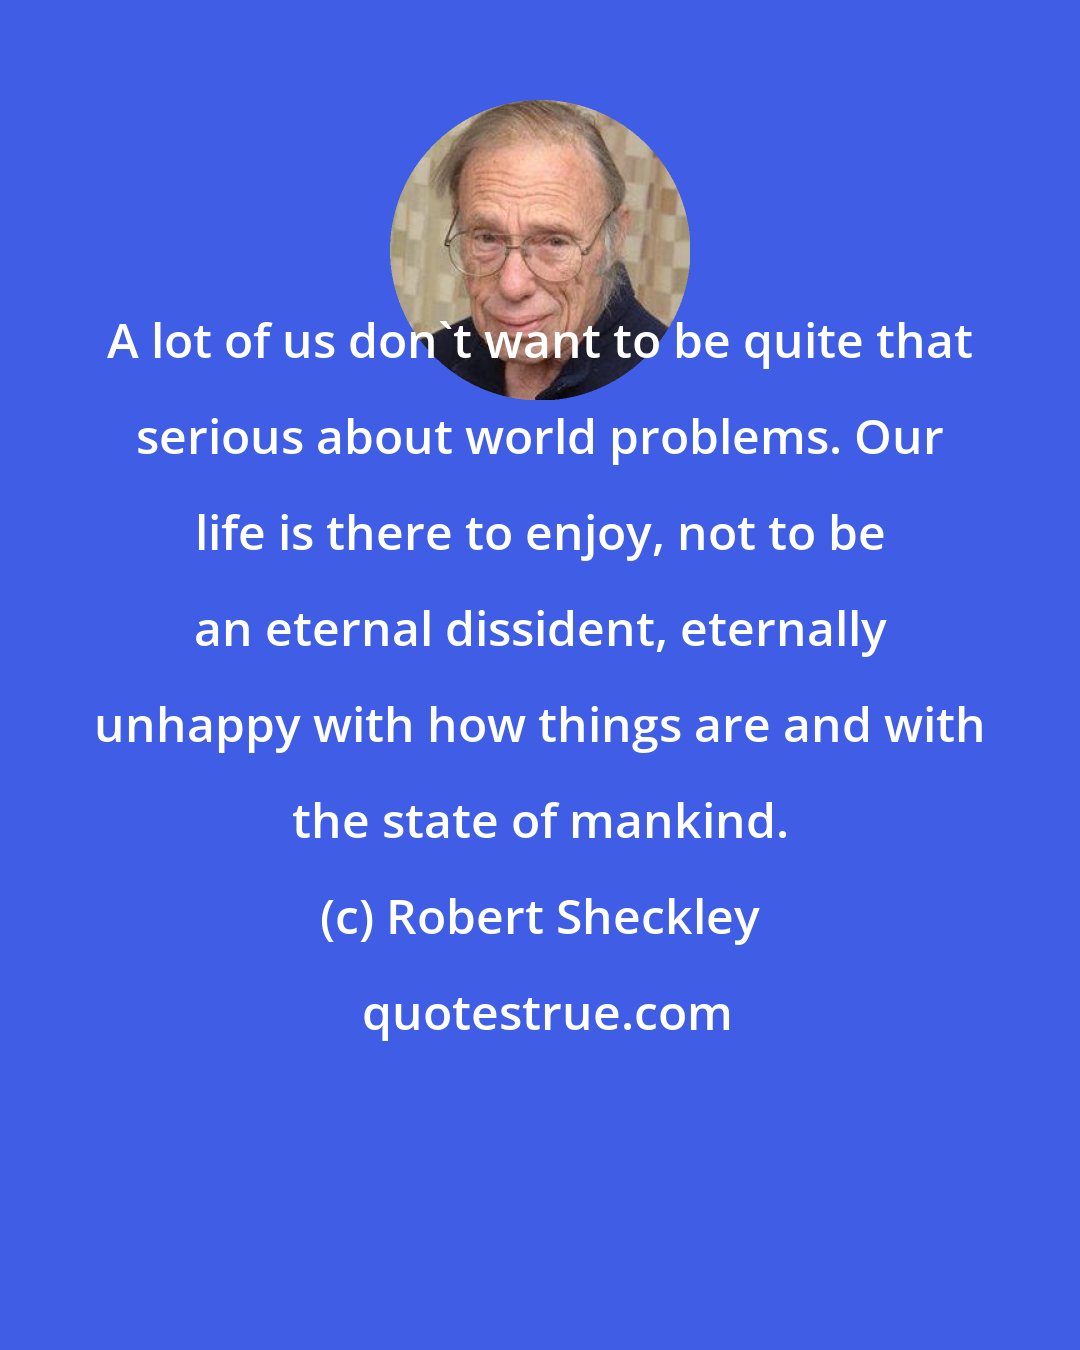 Robert Sheckley: A lot of us don't want to be quite that serious about world problems. Our life is there to enjoy, not to be an eternal dissident, eternally unhappy with how things are and with the state of mankind.